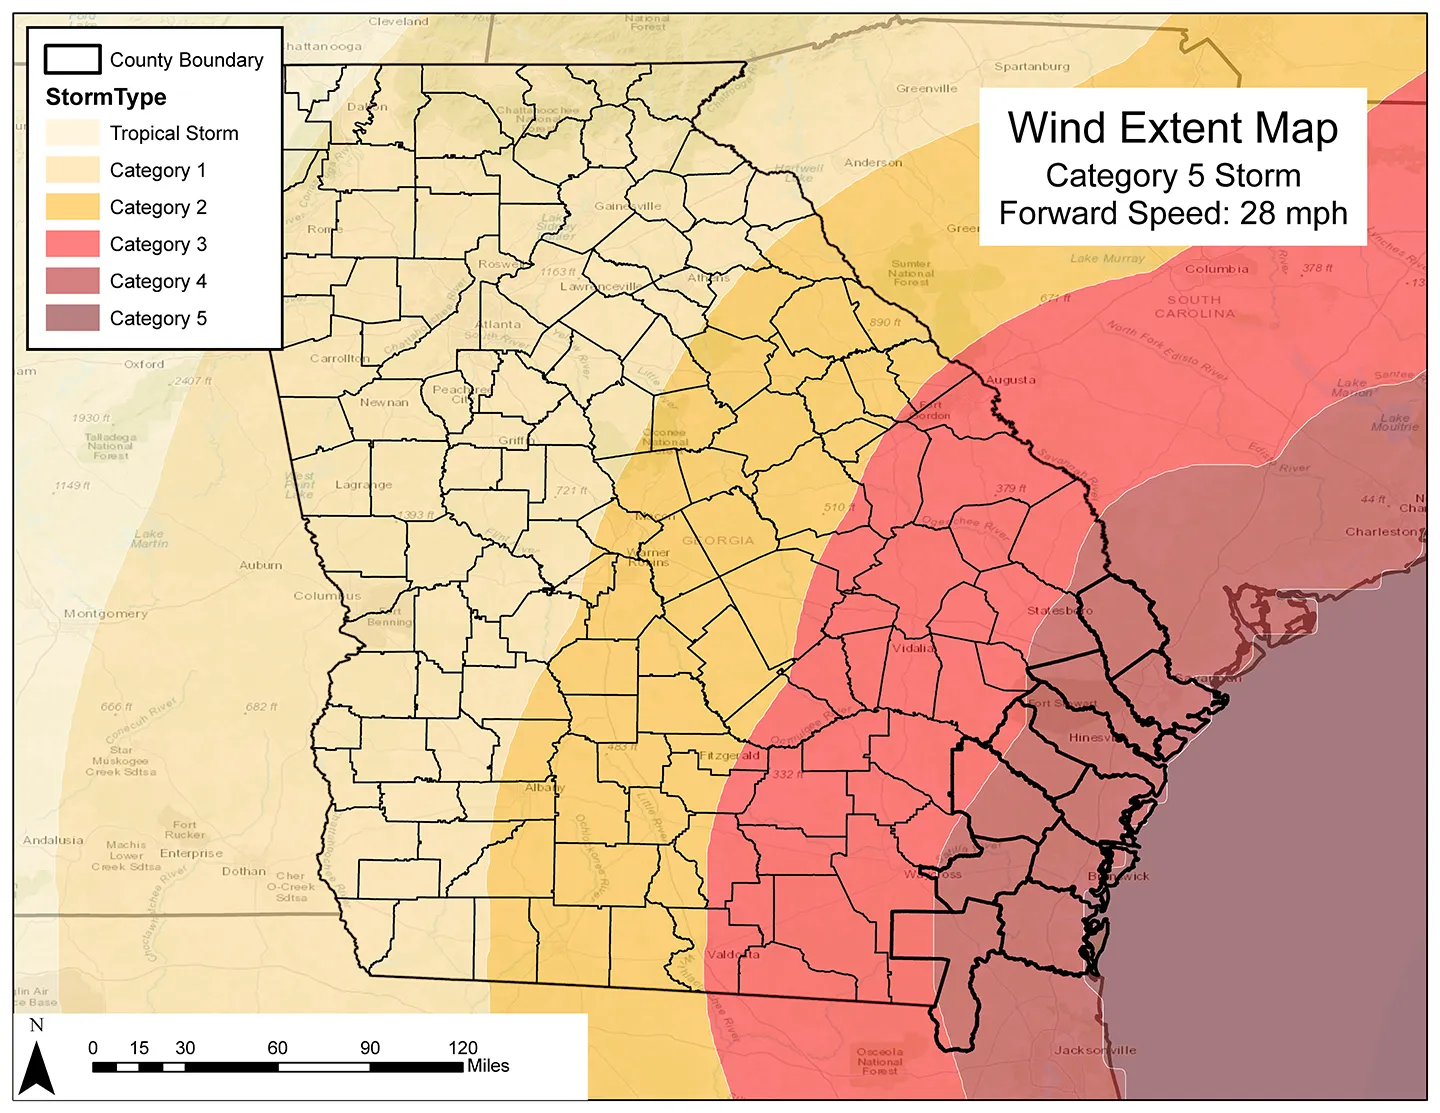 As part of this study, our firm provided inland wind decay maps to demonstrate the potential wind hazards for non-coastal counties of Georgia as a result of a landfalling hurricane.